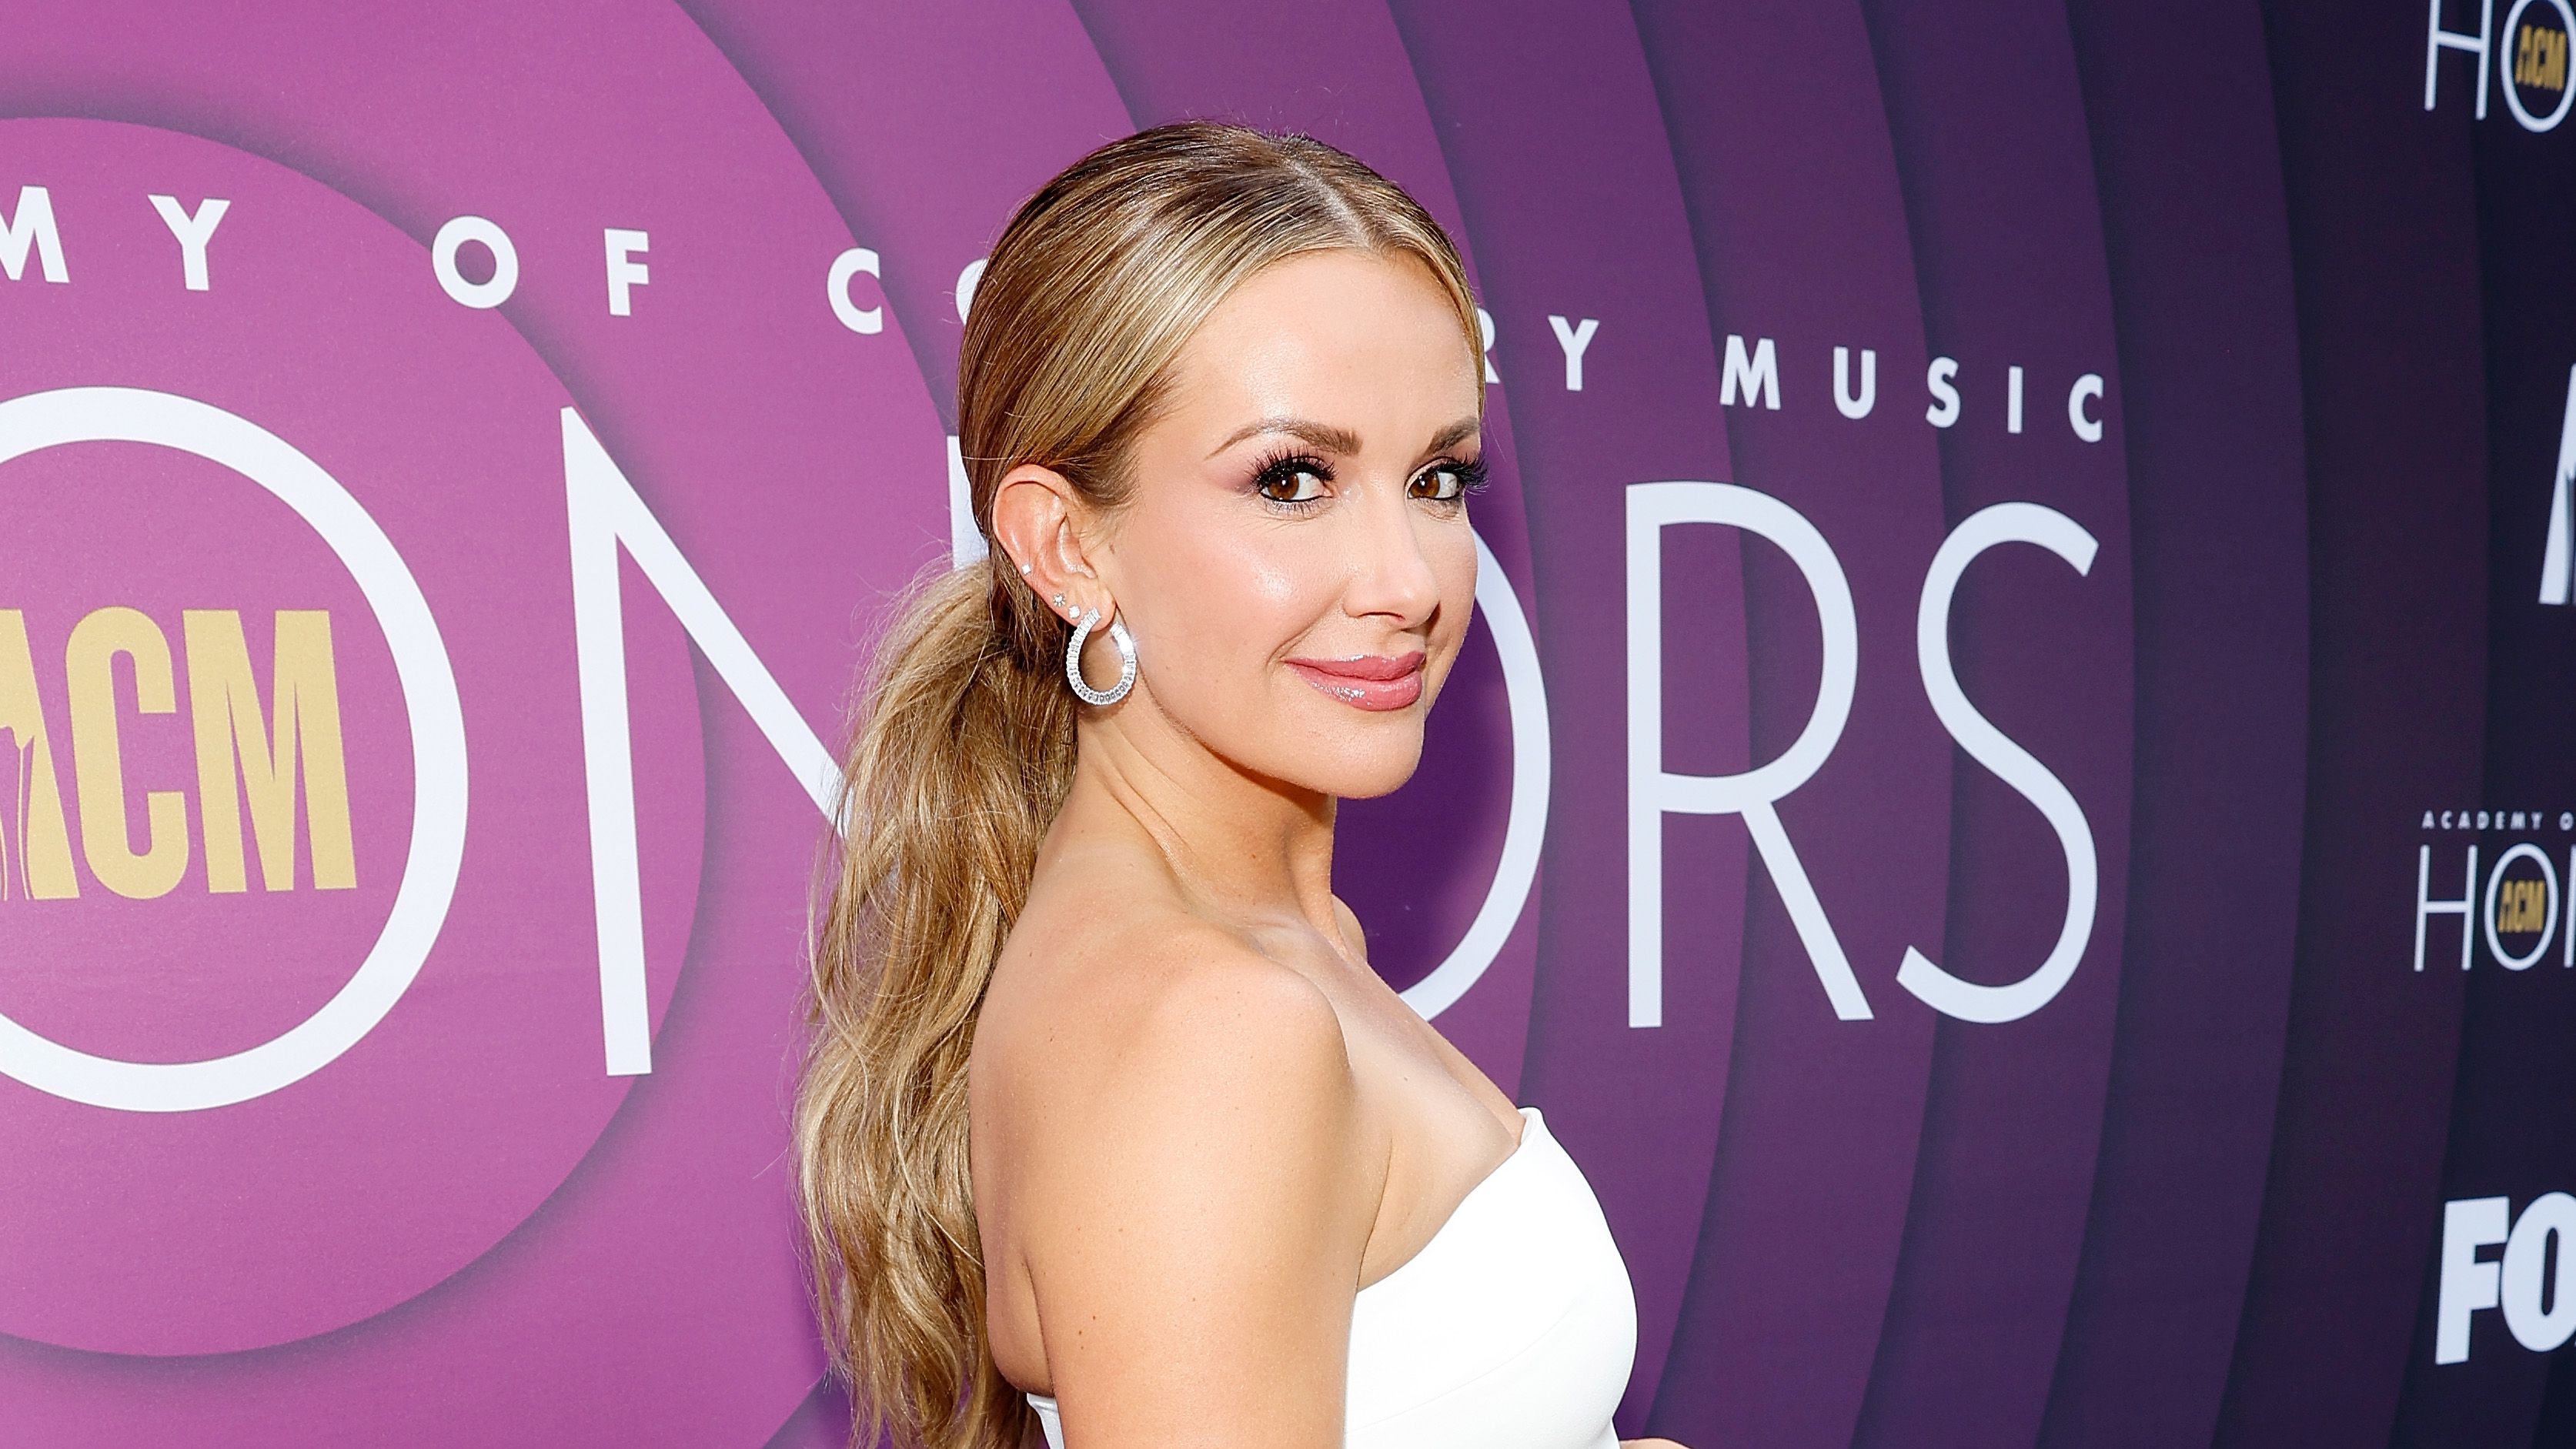 https://hips.hearstapps.com/hmg-prod/images/carly-pearce-attends-the-16th-annual-academy-of-country-news-photo-1693502589.jpg?crop=1xw:0.37511xh;center,top